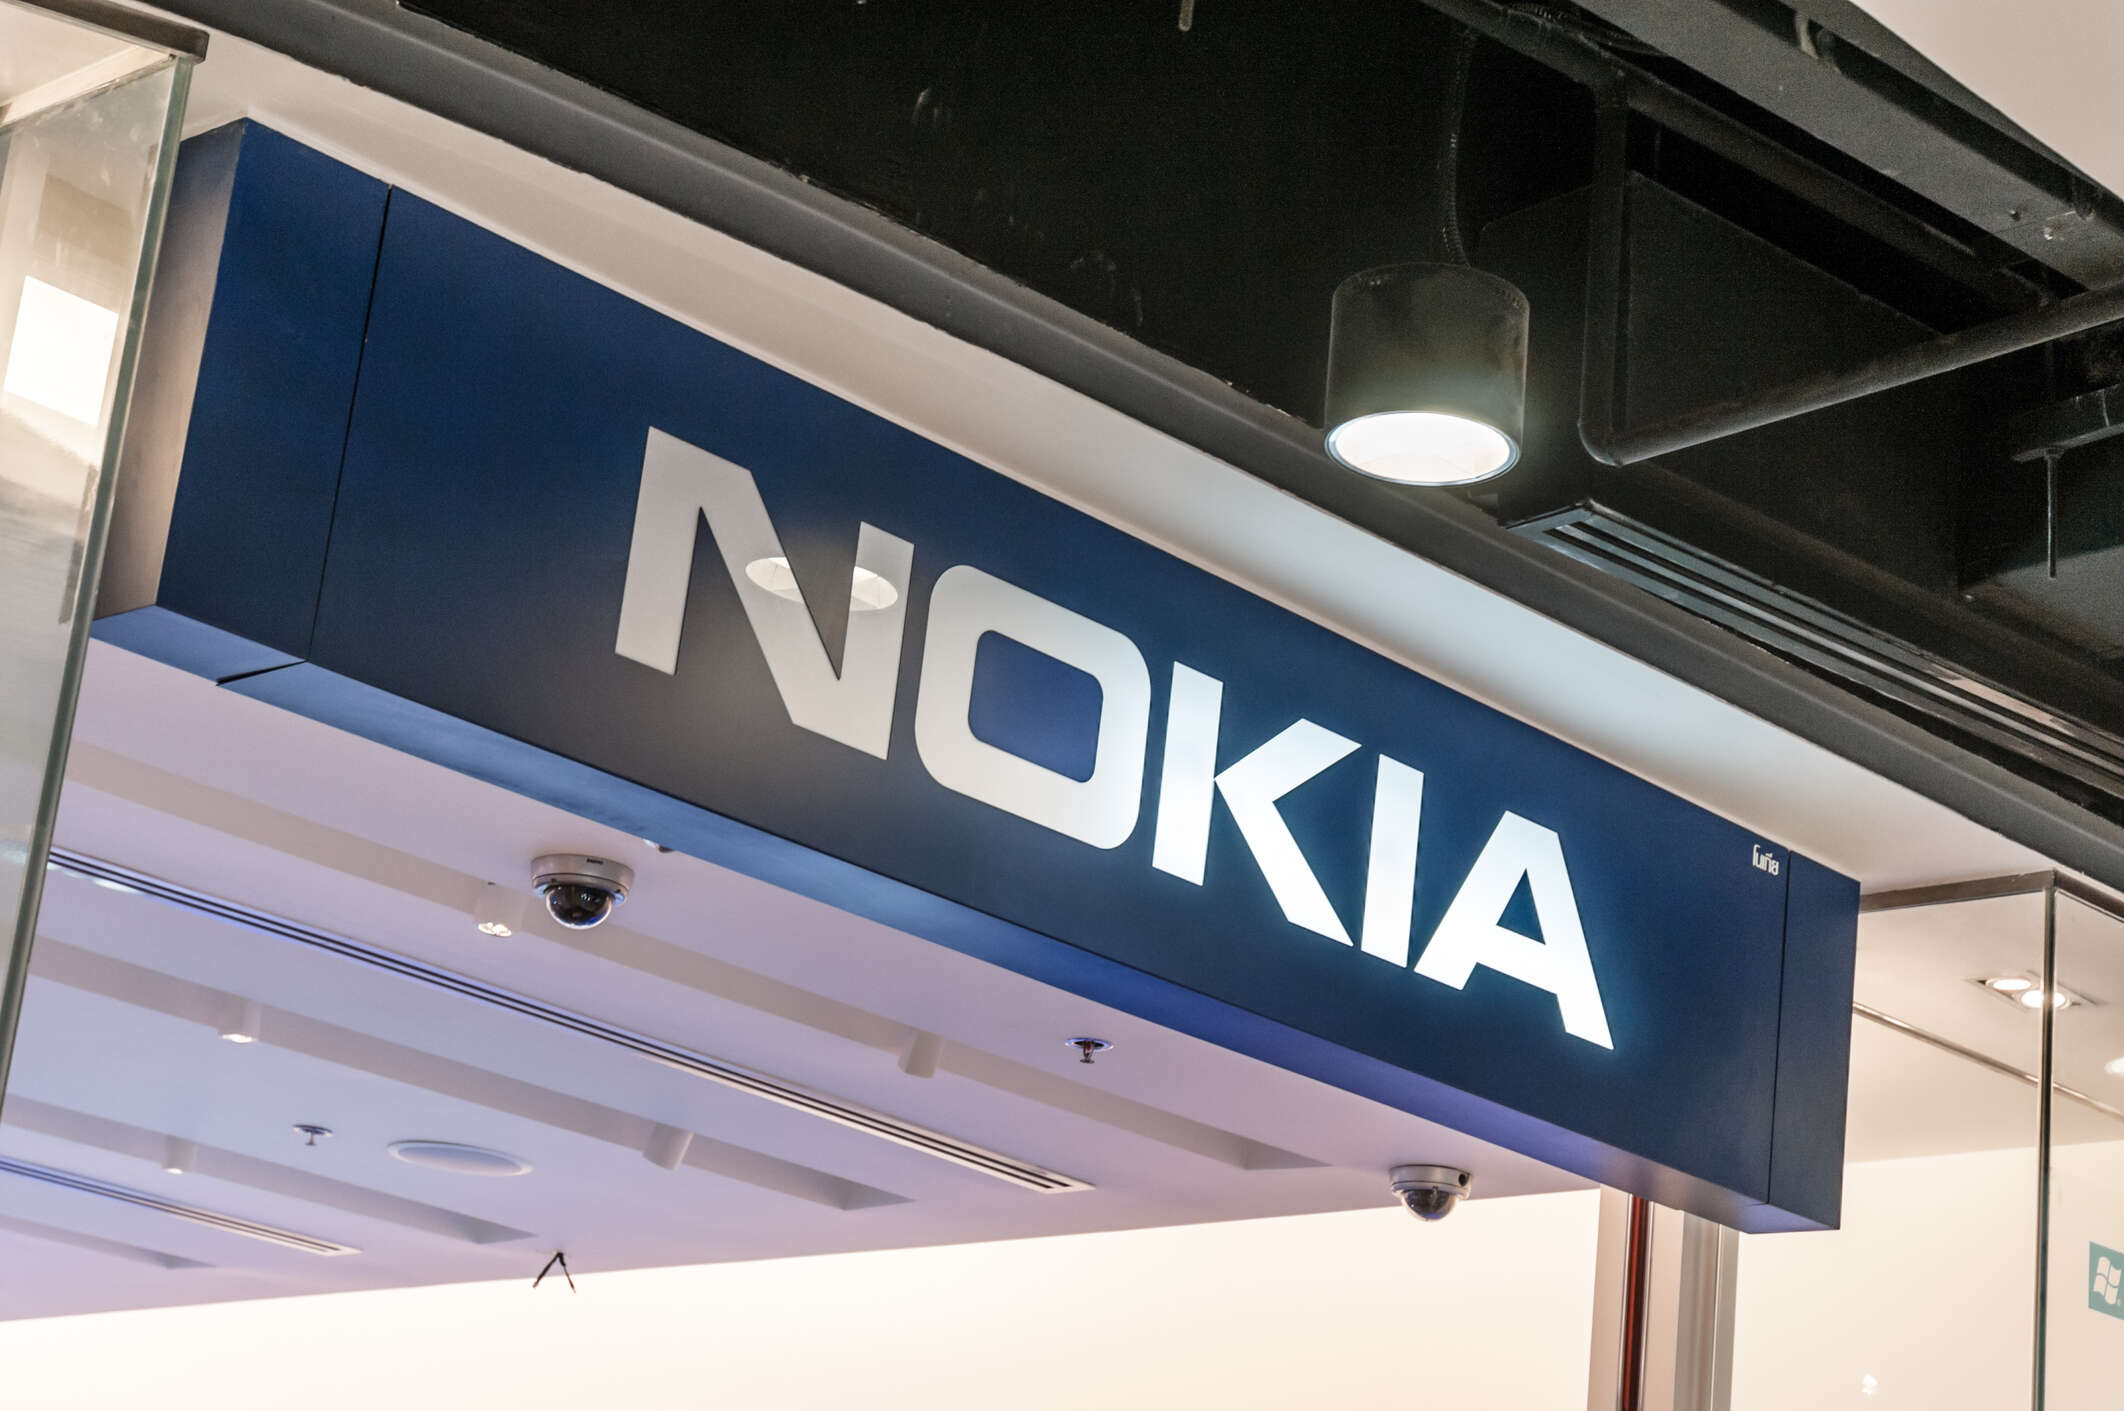 The launch of Nokia's SaaS products for telcos could be impeccably timed